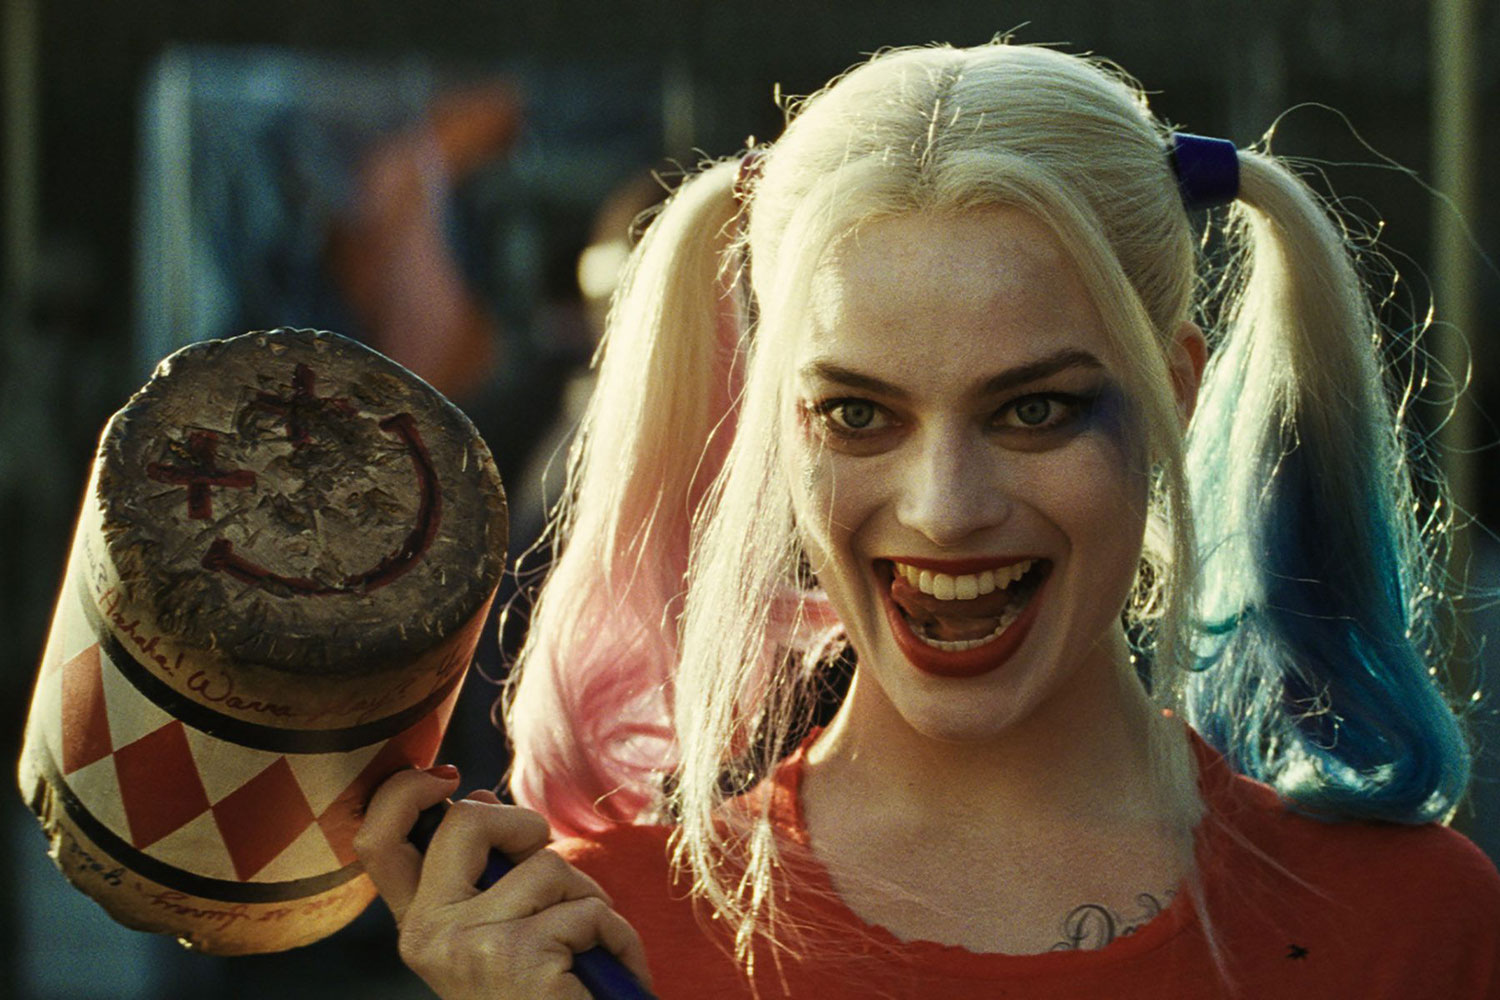 Suicide Squad 2 Cast, Release Date, Trailer, News, Story, and More